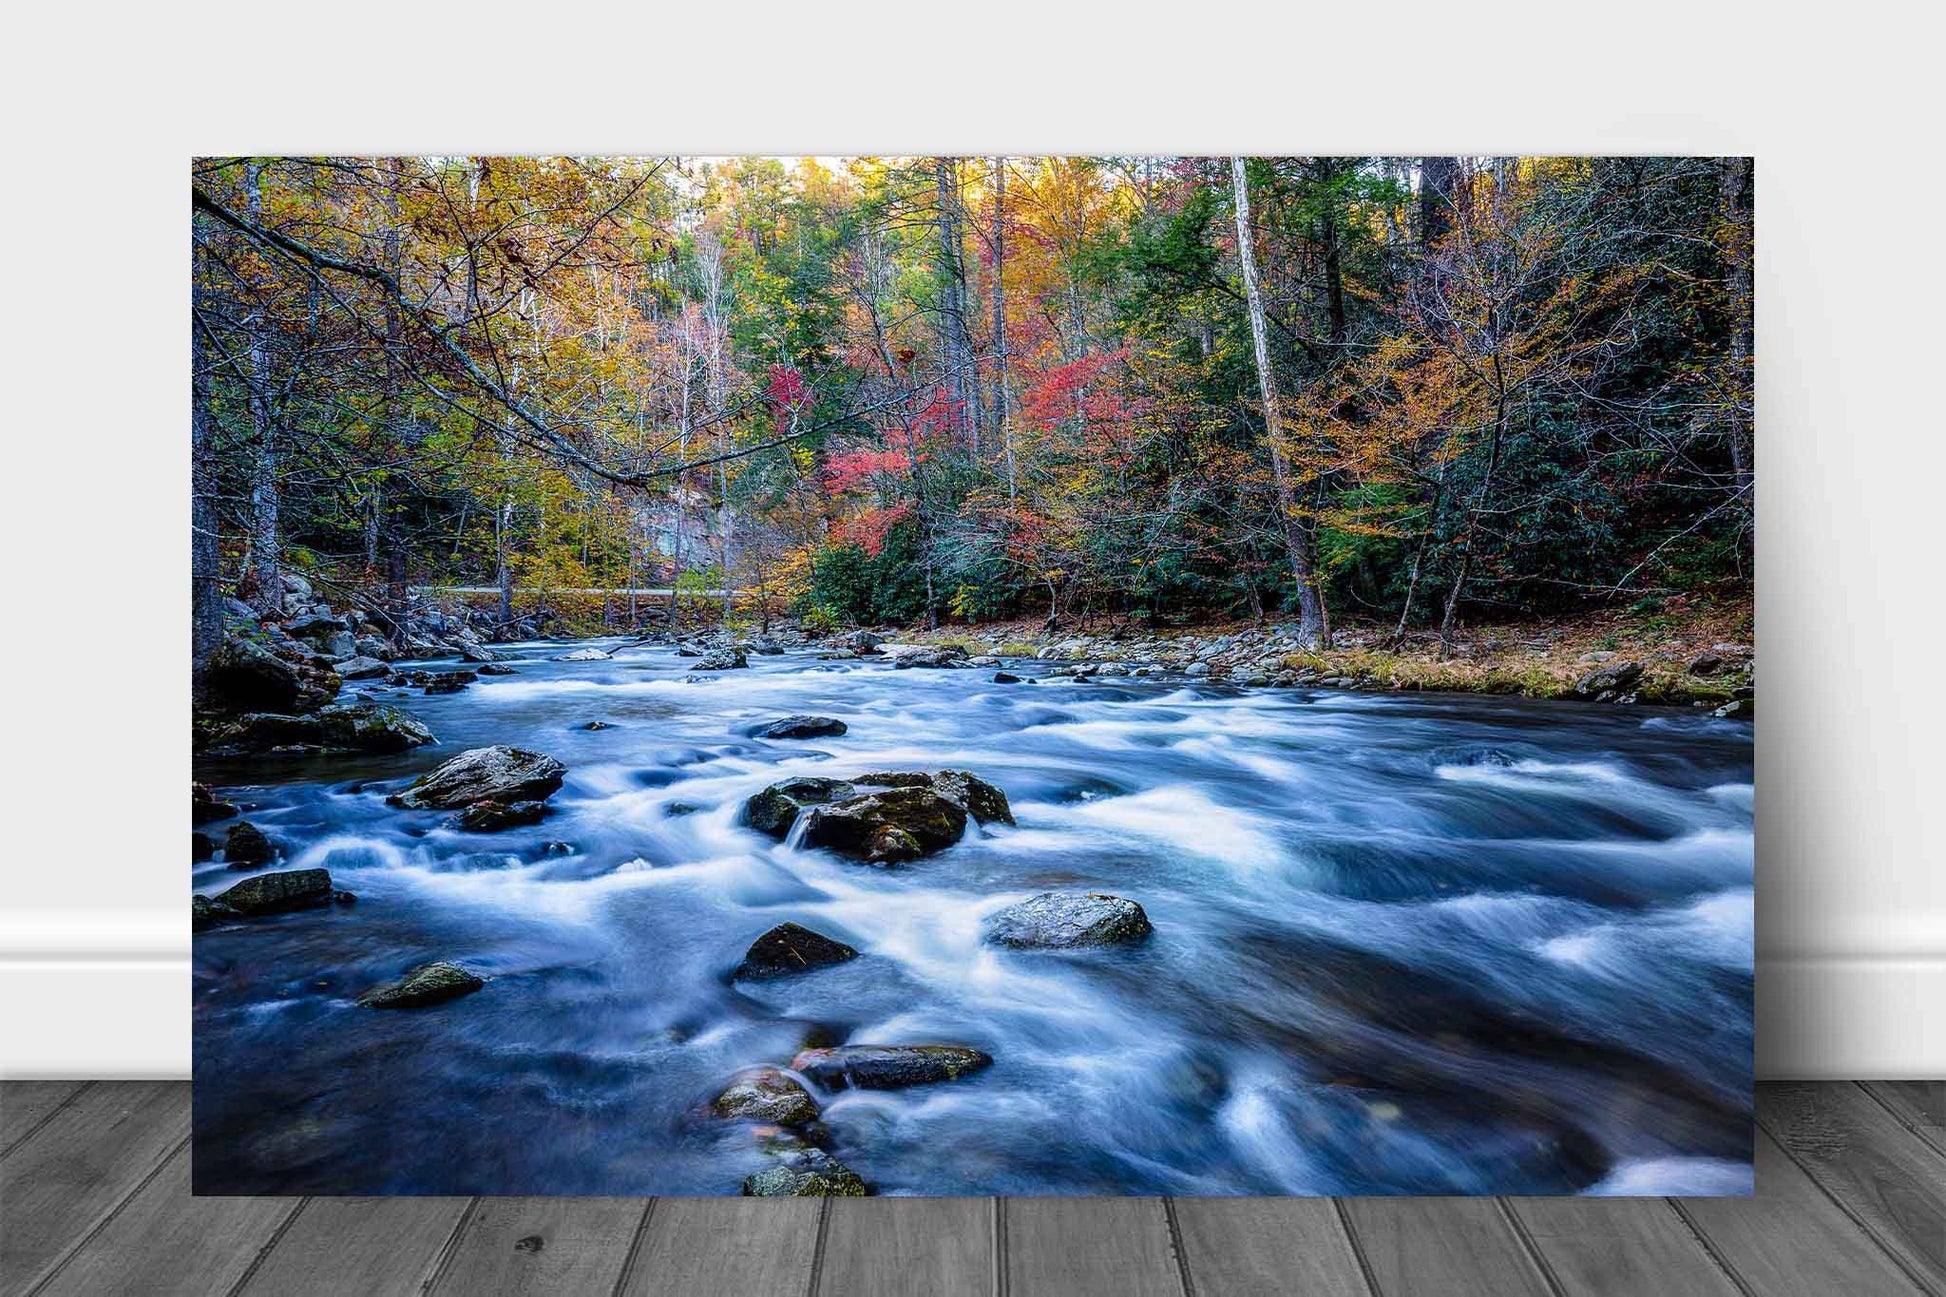 Landscape metal print wall art of Laurel Creek flowing through fall color on an autumn day in Great Smoky Mountains National Park by Sean Ramsey of Southern Plains Photography.